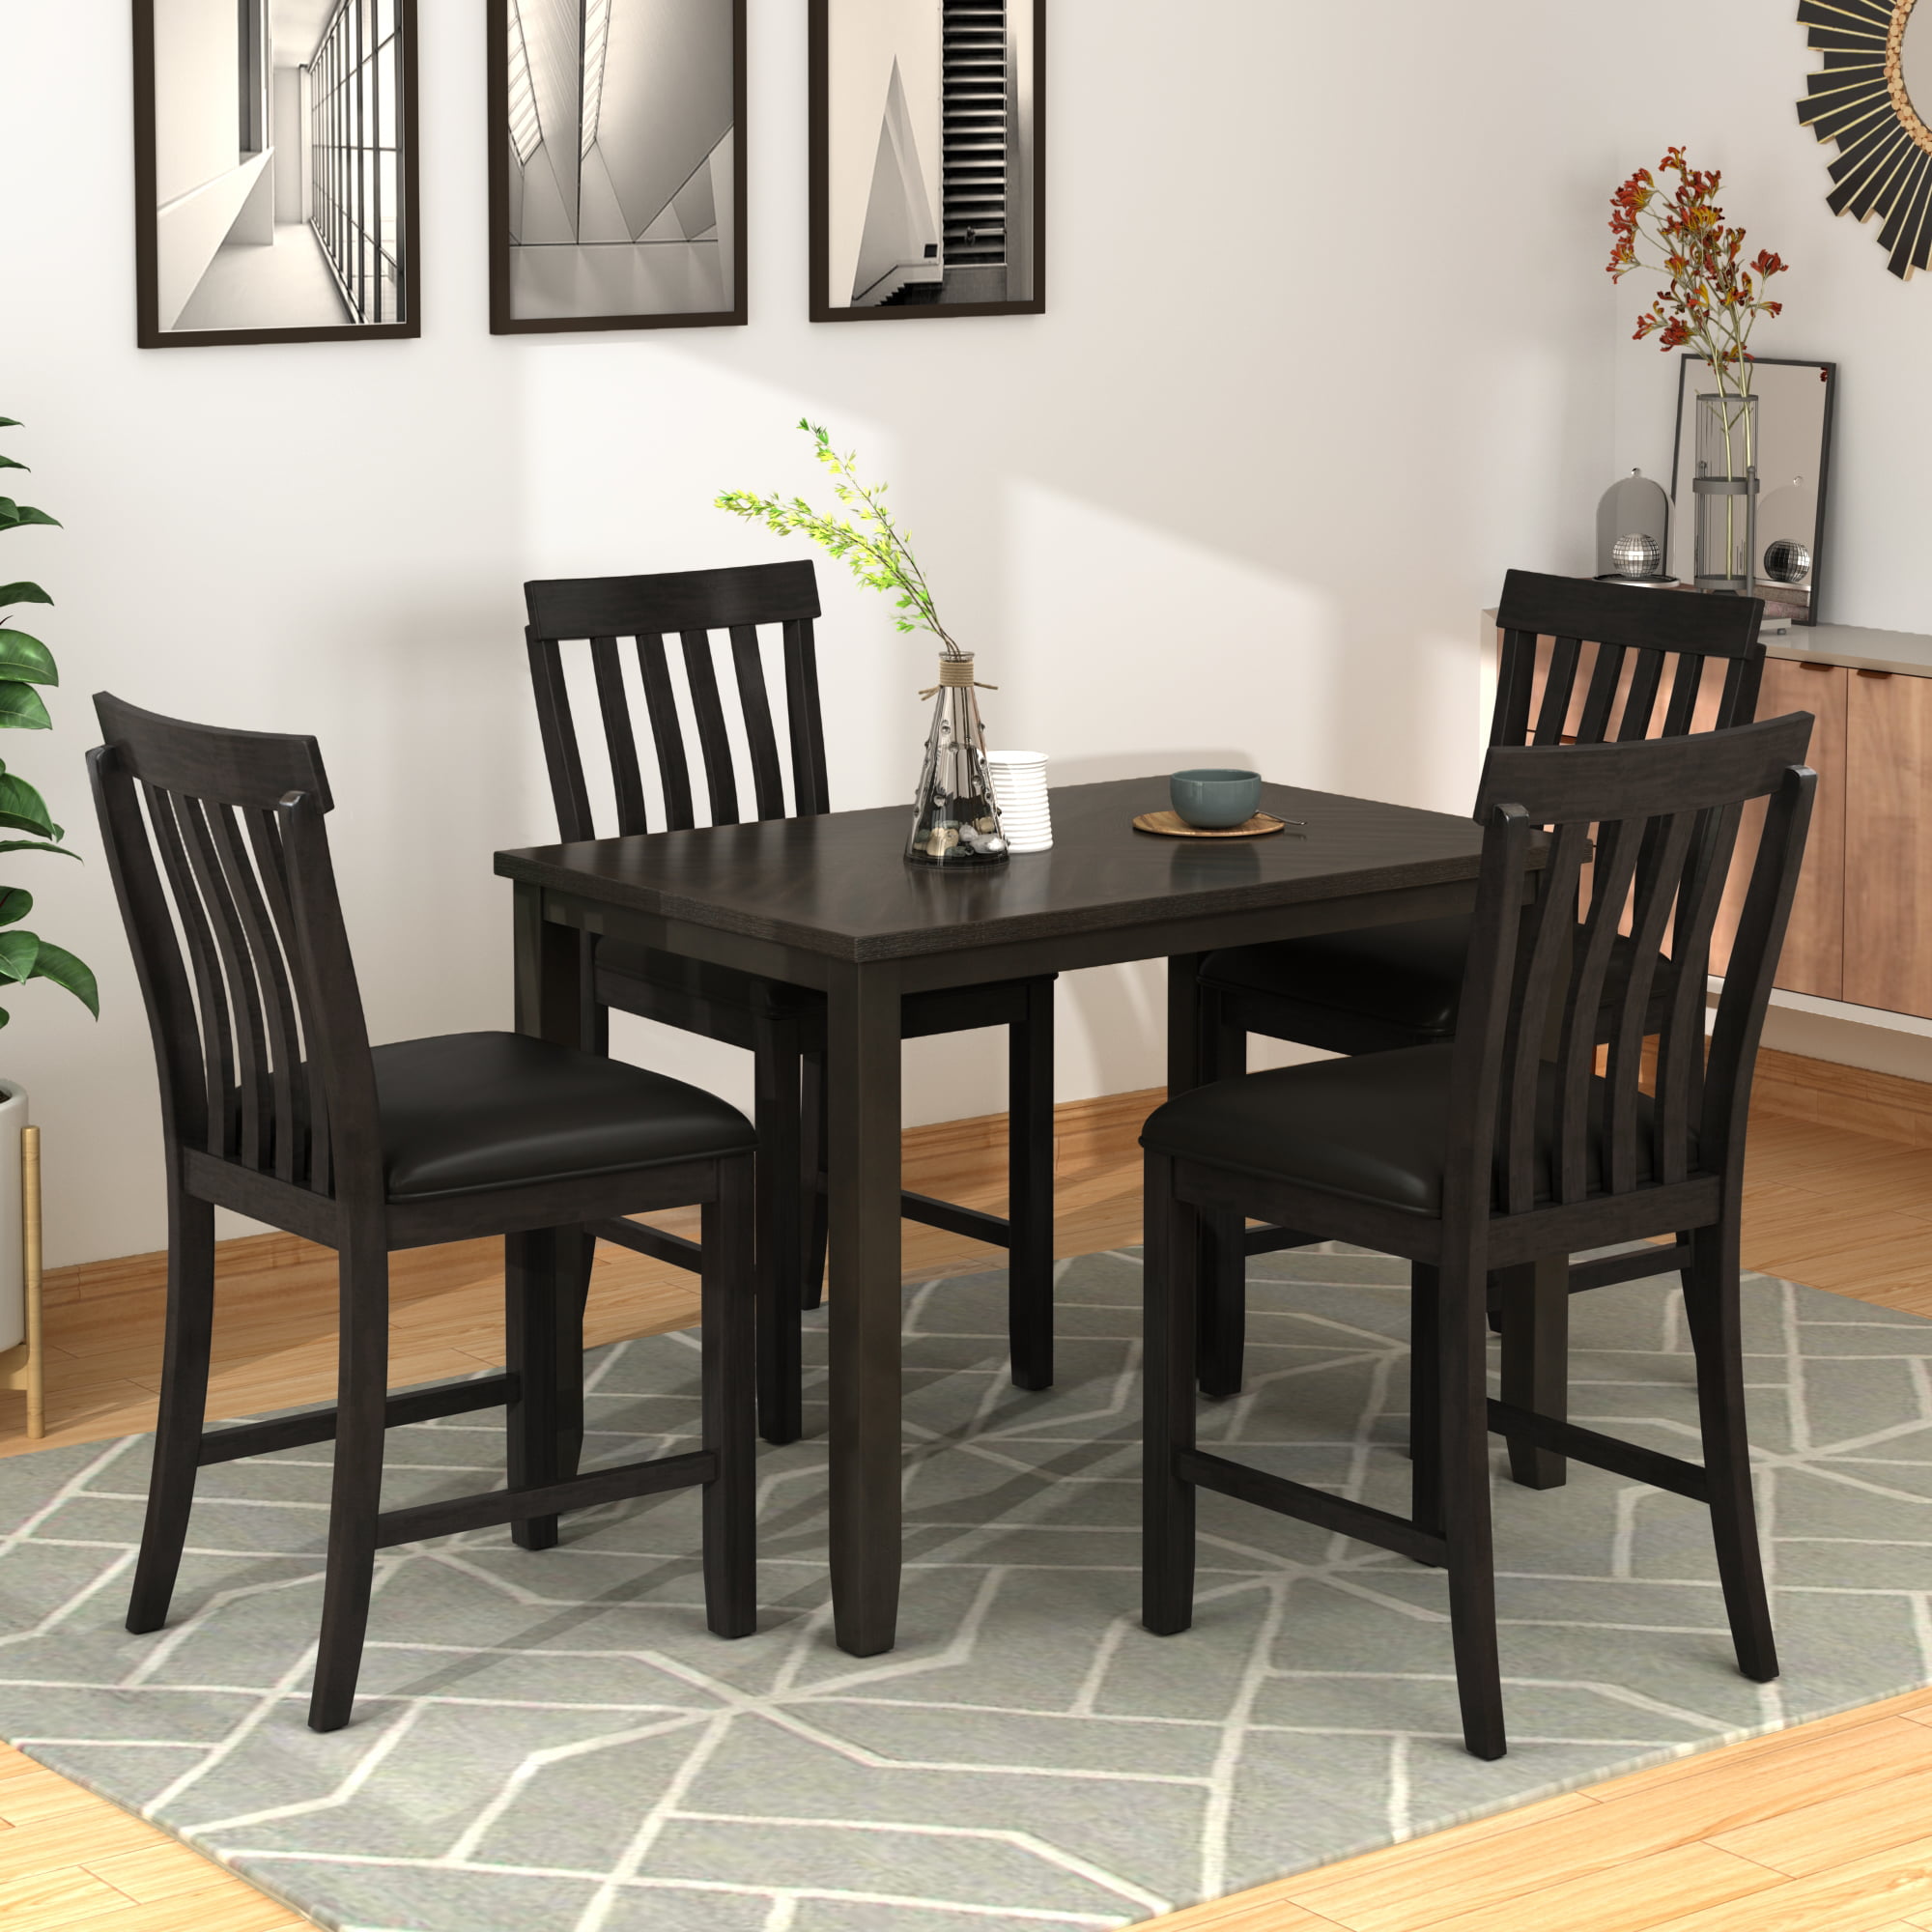 enyopro 5 Piece Wooden Dining Table Set, Counter Height Dining Set ...